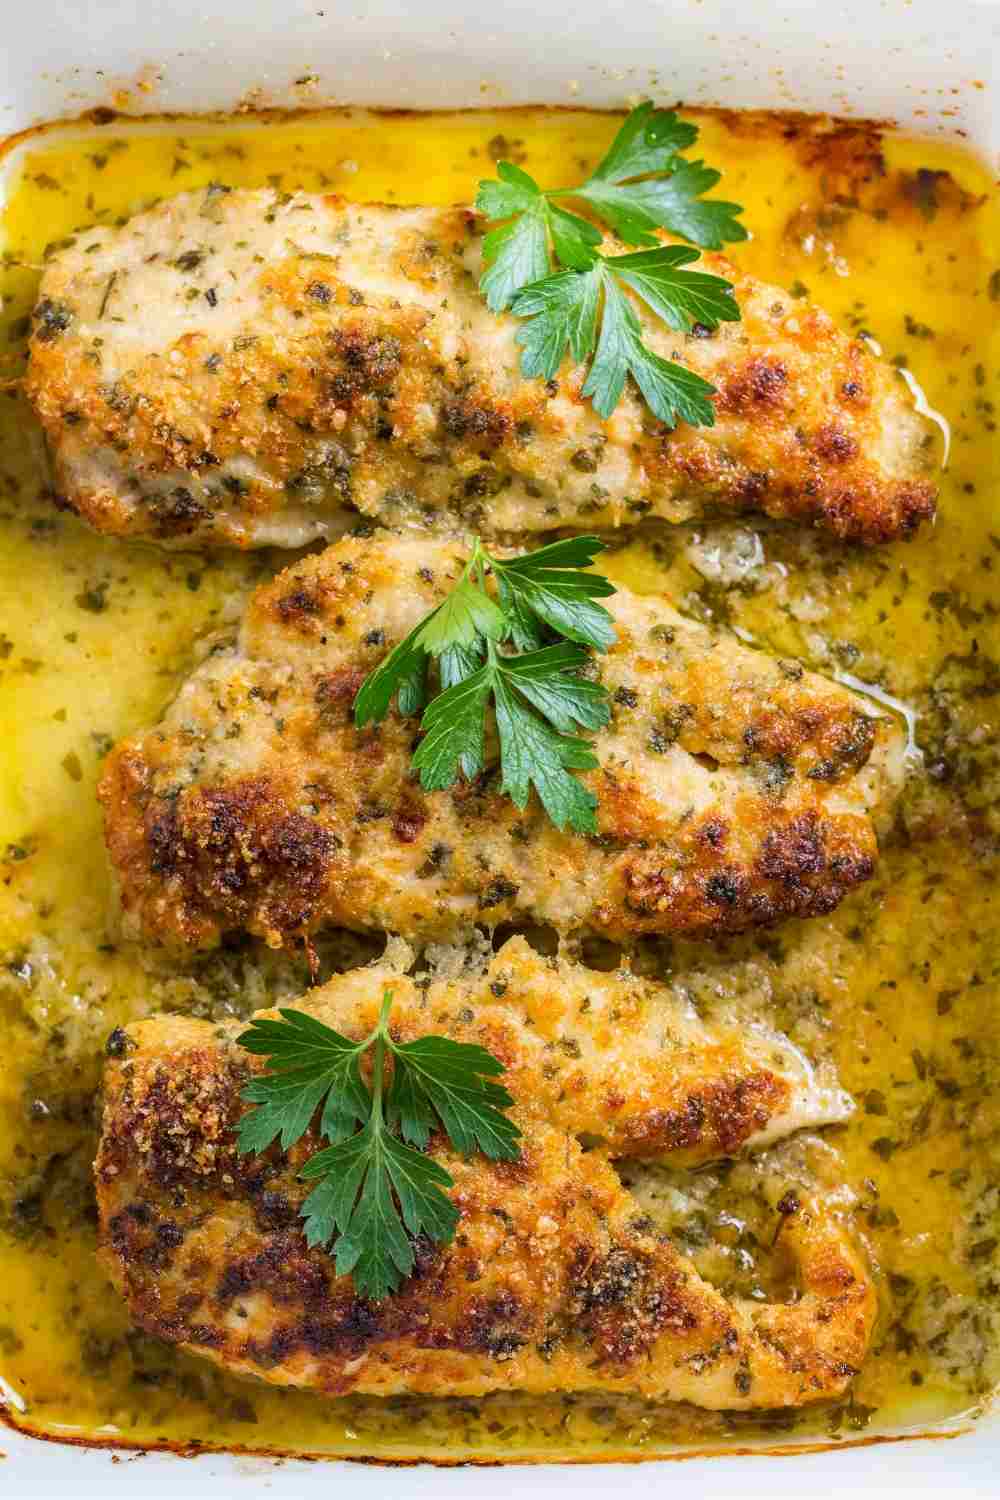 30 Weight Watchers Chicken Recipes - Table for Seven